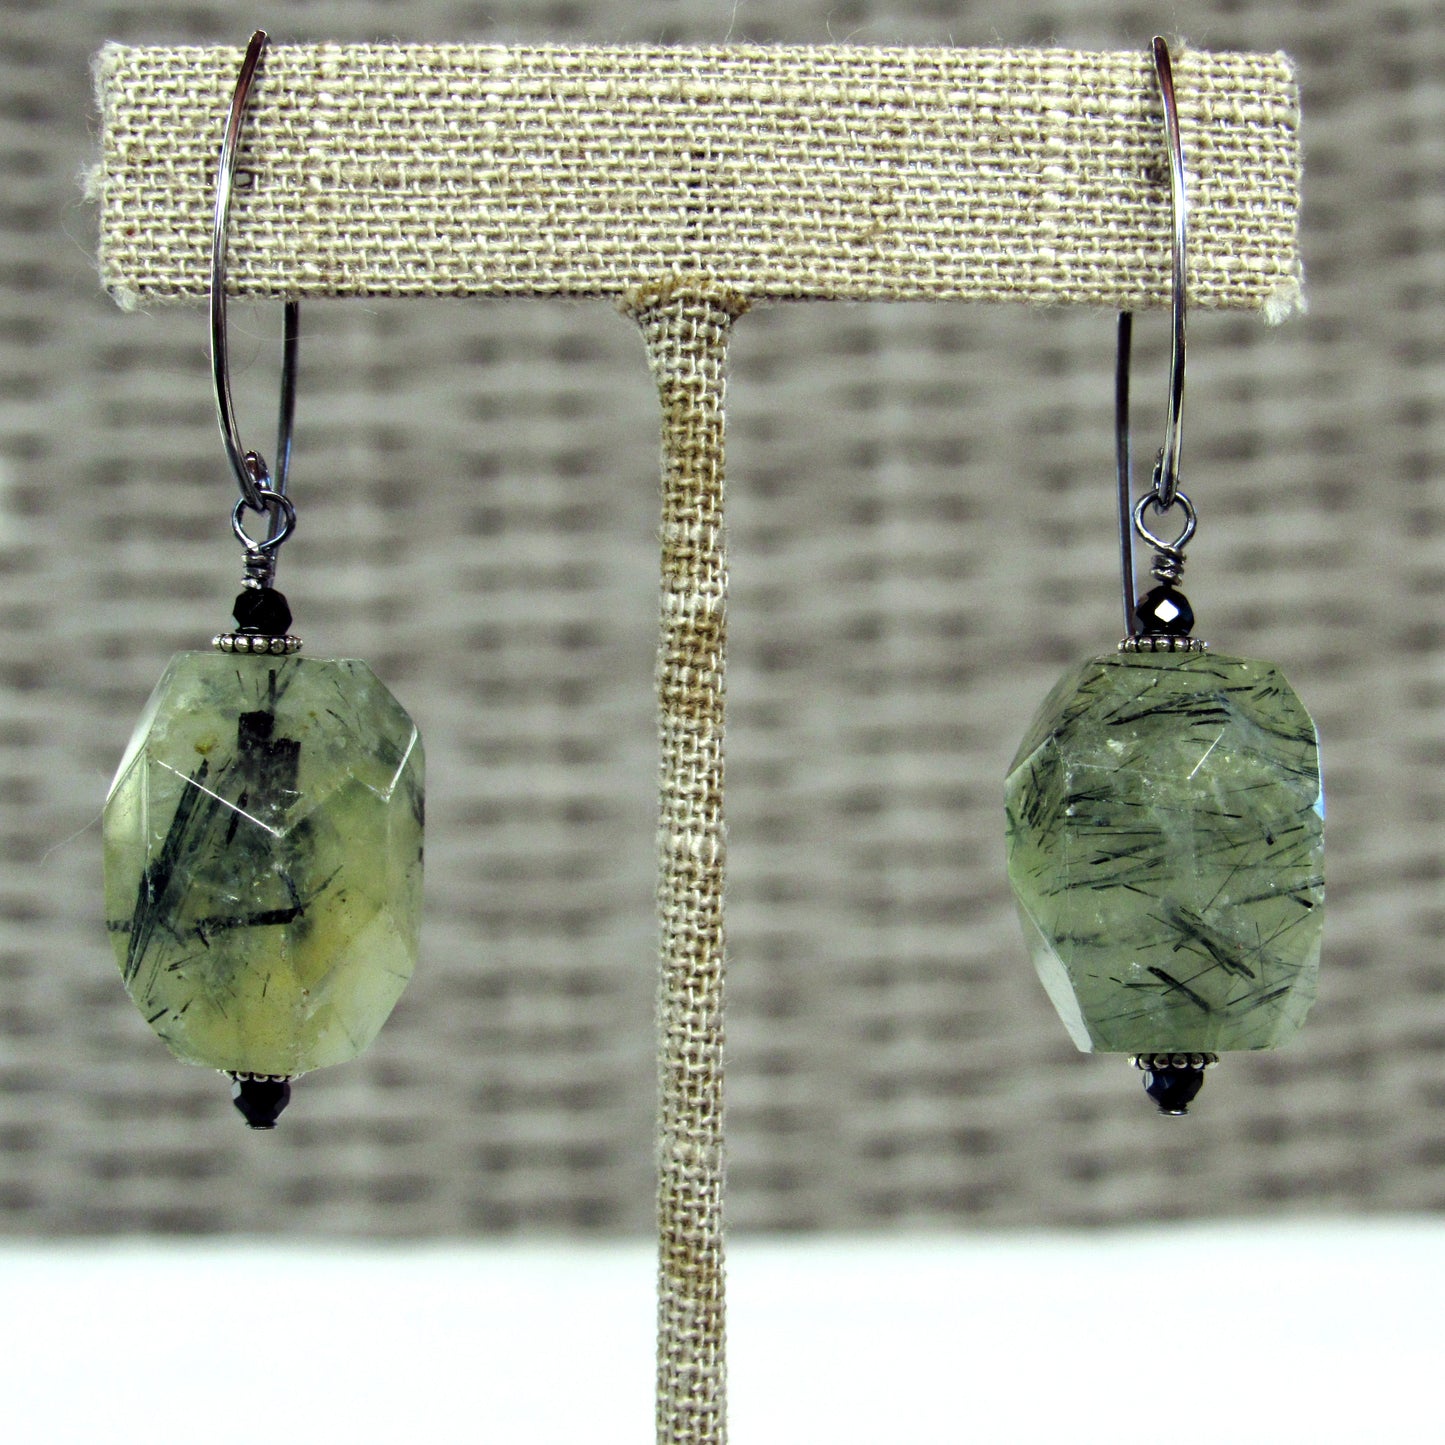 Prehnite and Oxidized Sterling Silver Drop Earrings